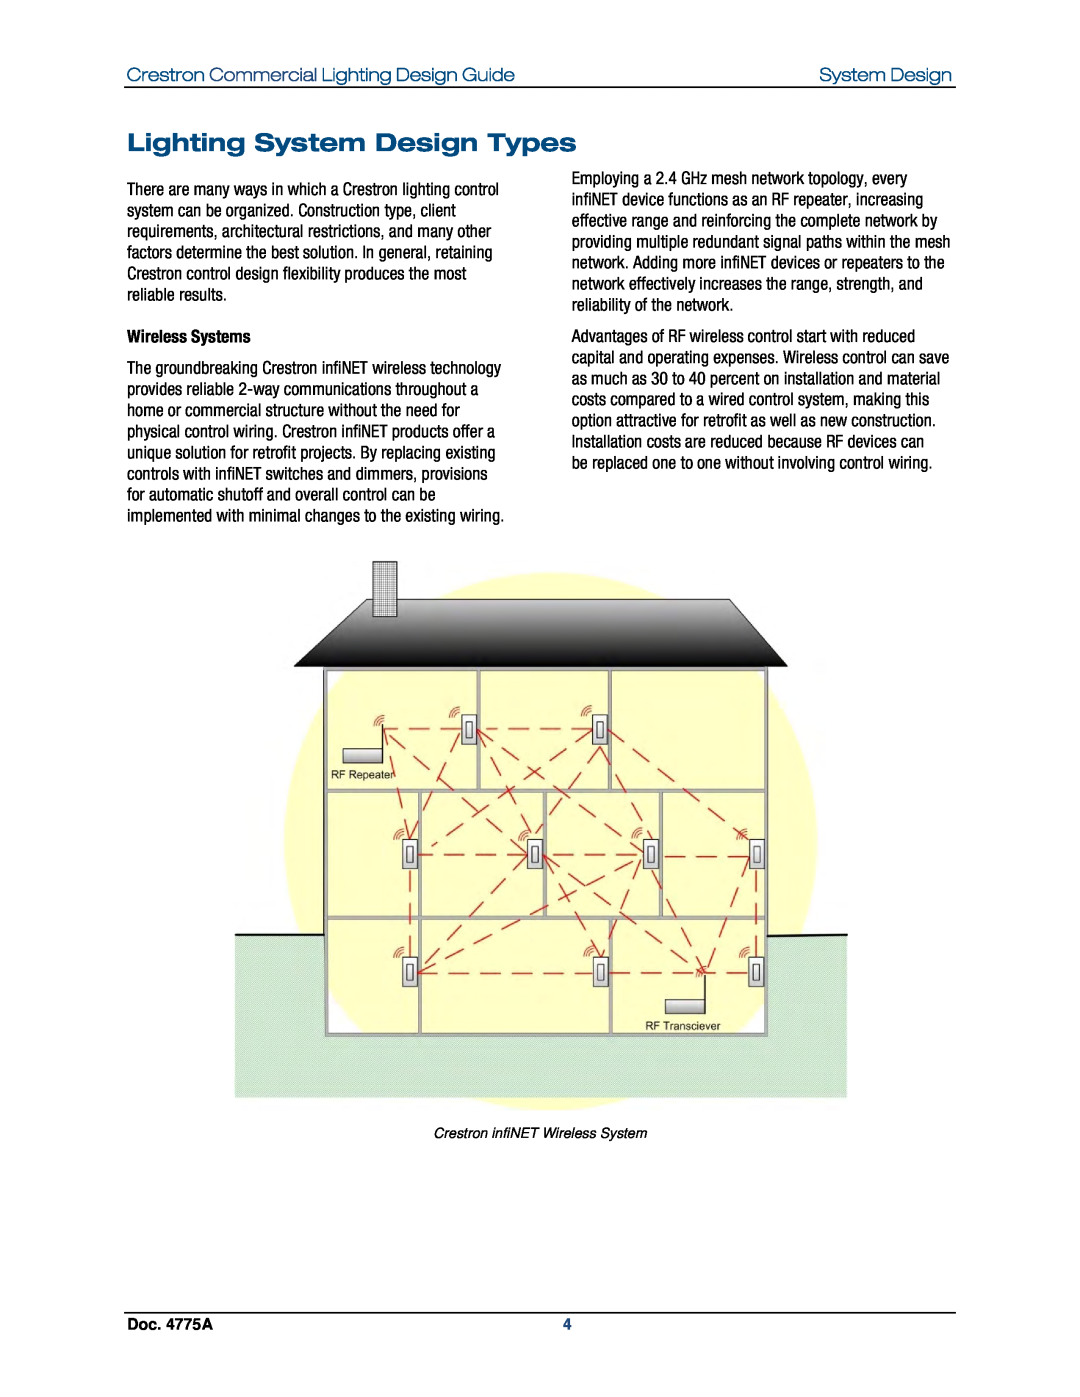 Crestron electronic GLPS-SW-FT Lighting System Design Types, Wireless Systems, Crestron Commercial Lighting Design Guide 